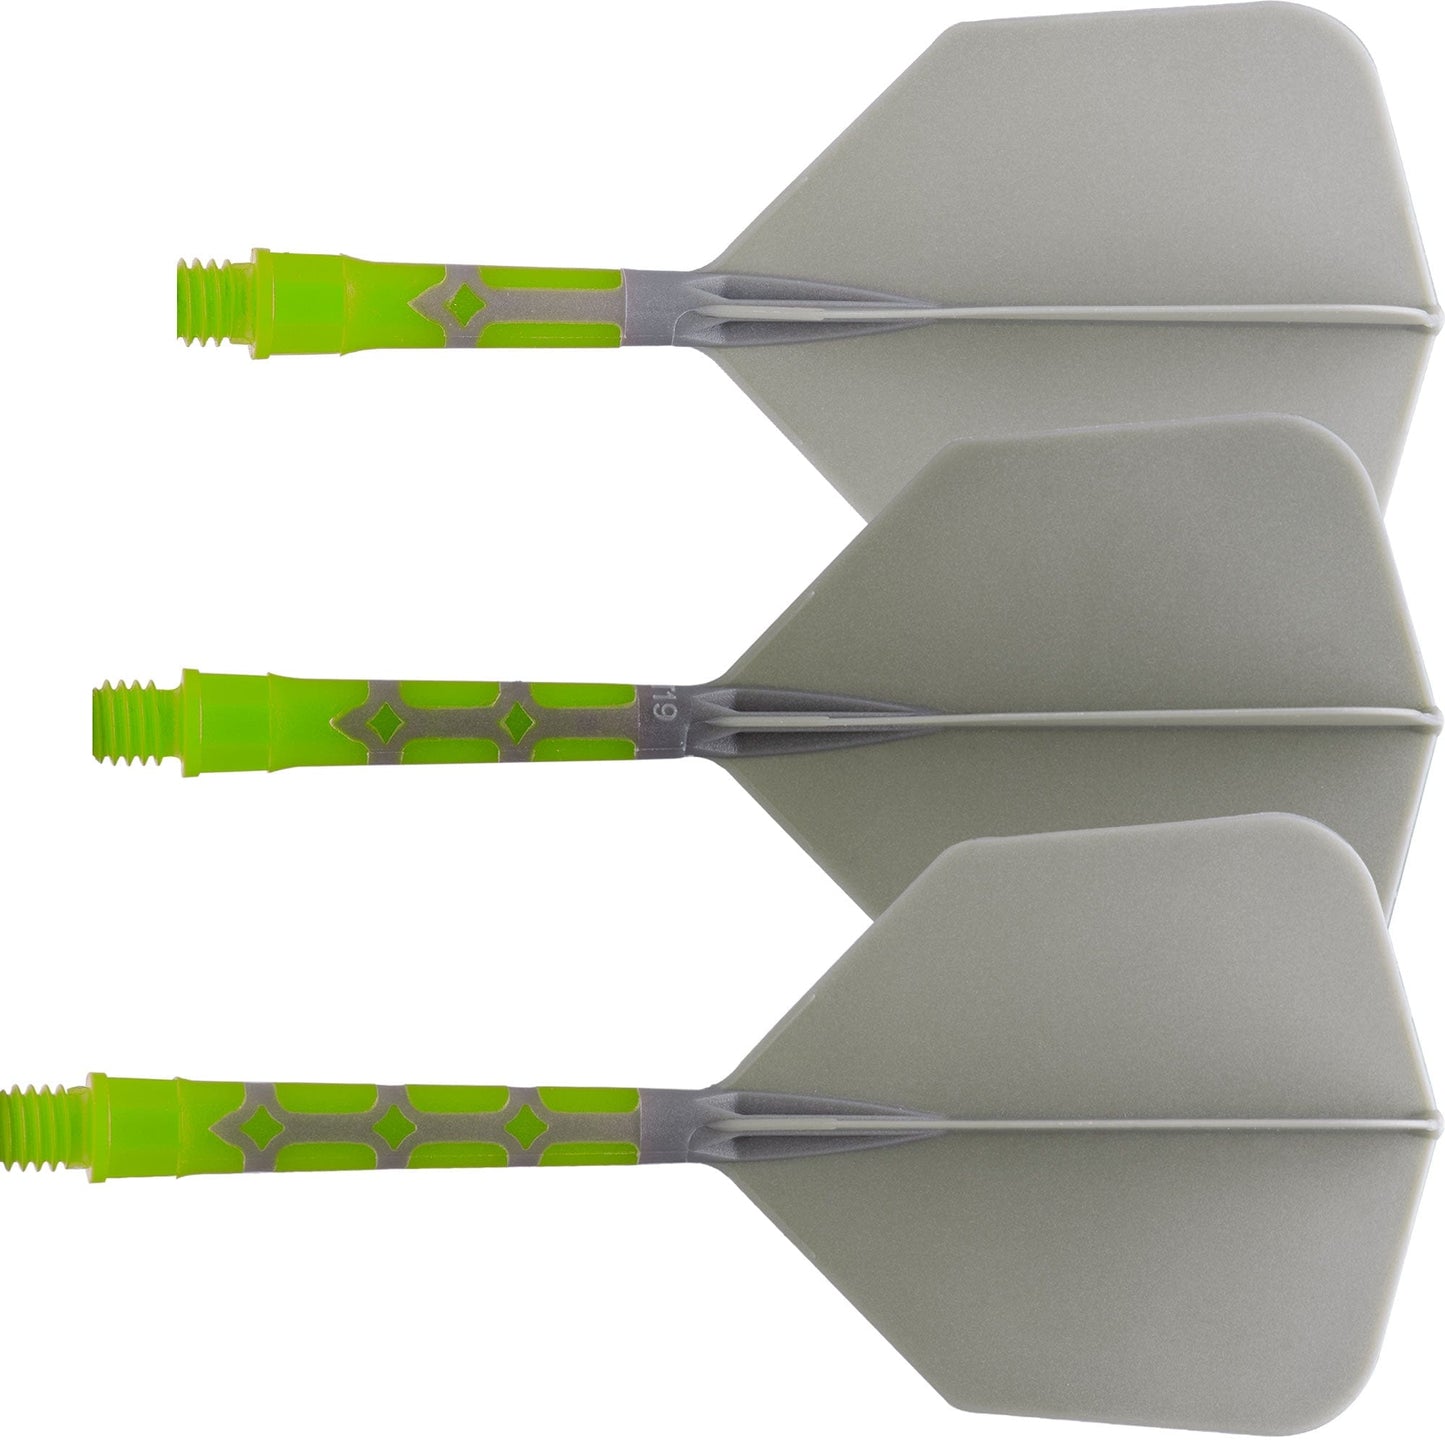 Cuesoul Rost T19 Integrated Dart Shaft and Flights - Big Wing - Lime Green with Grey Flight